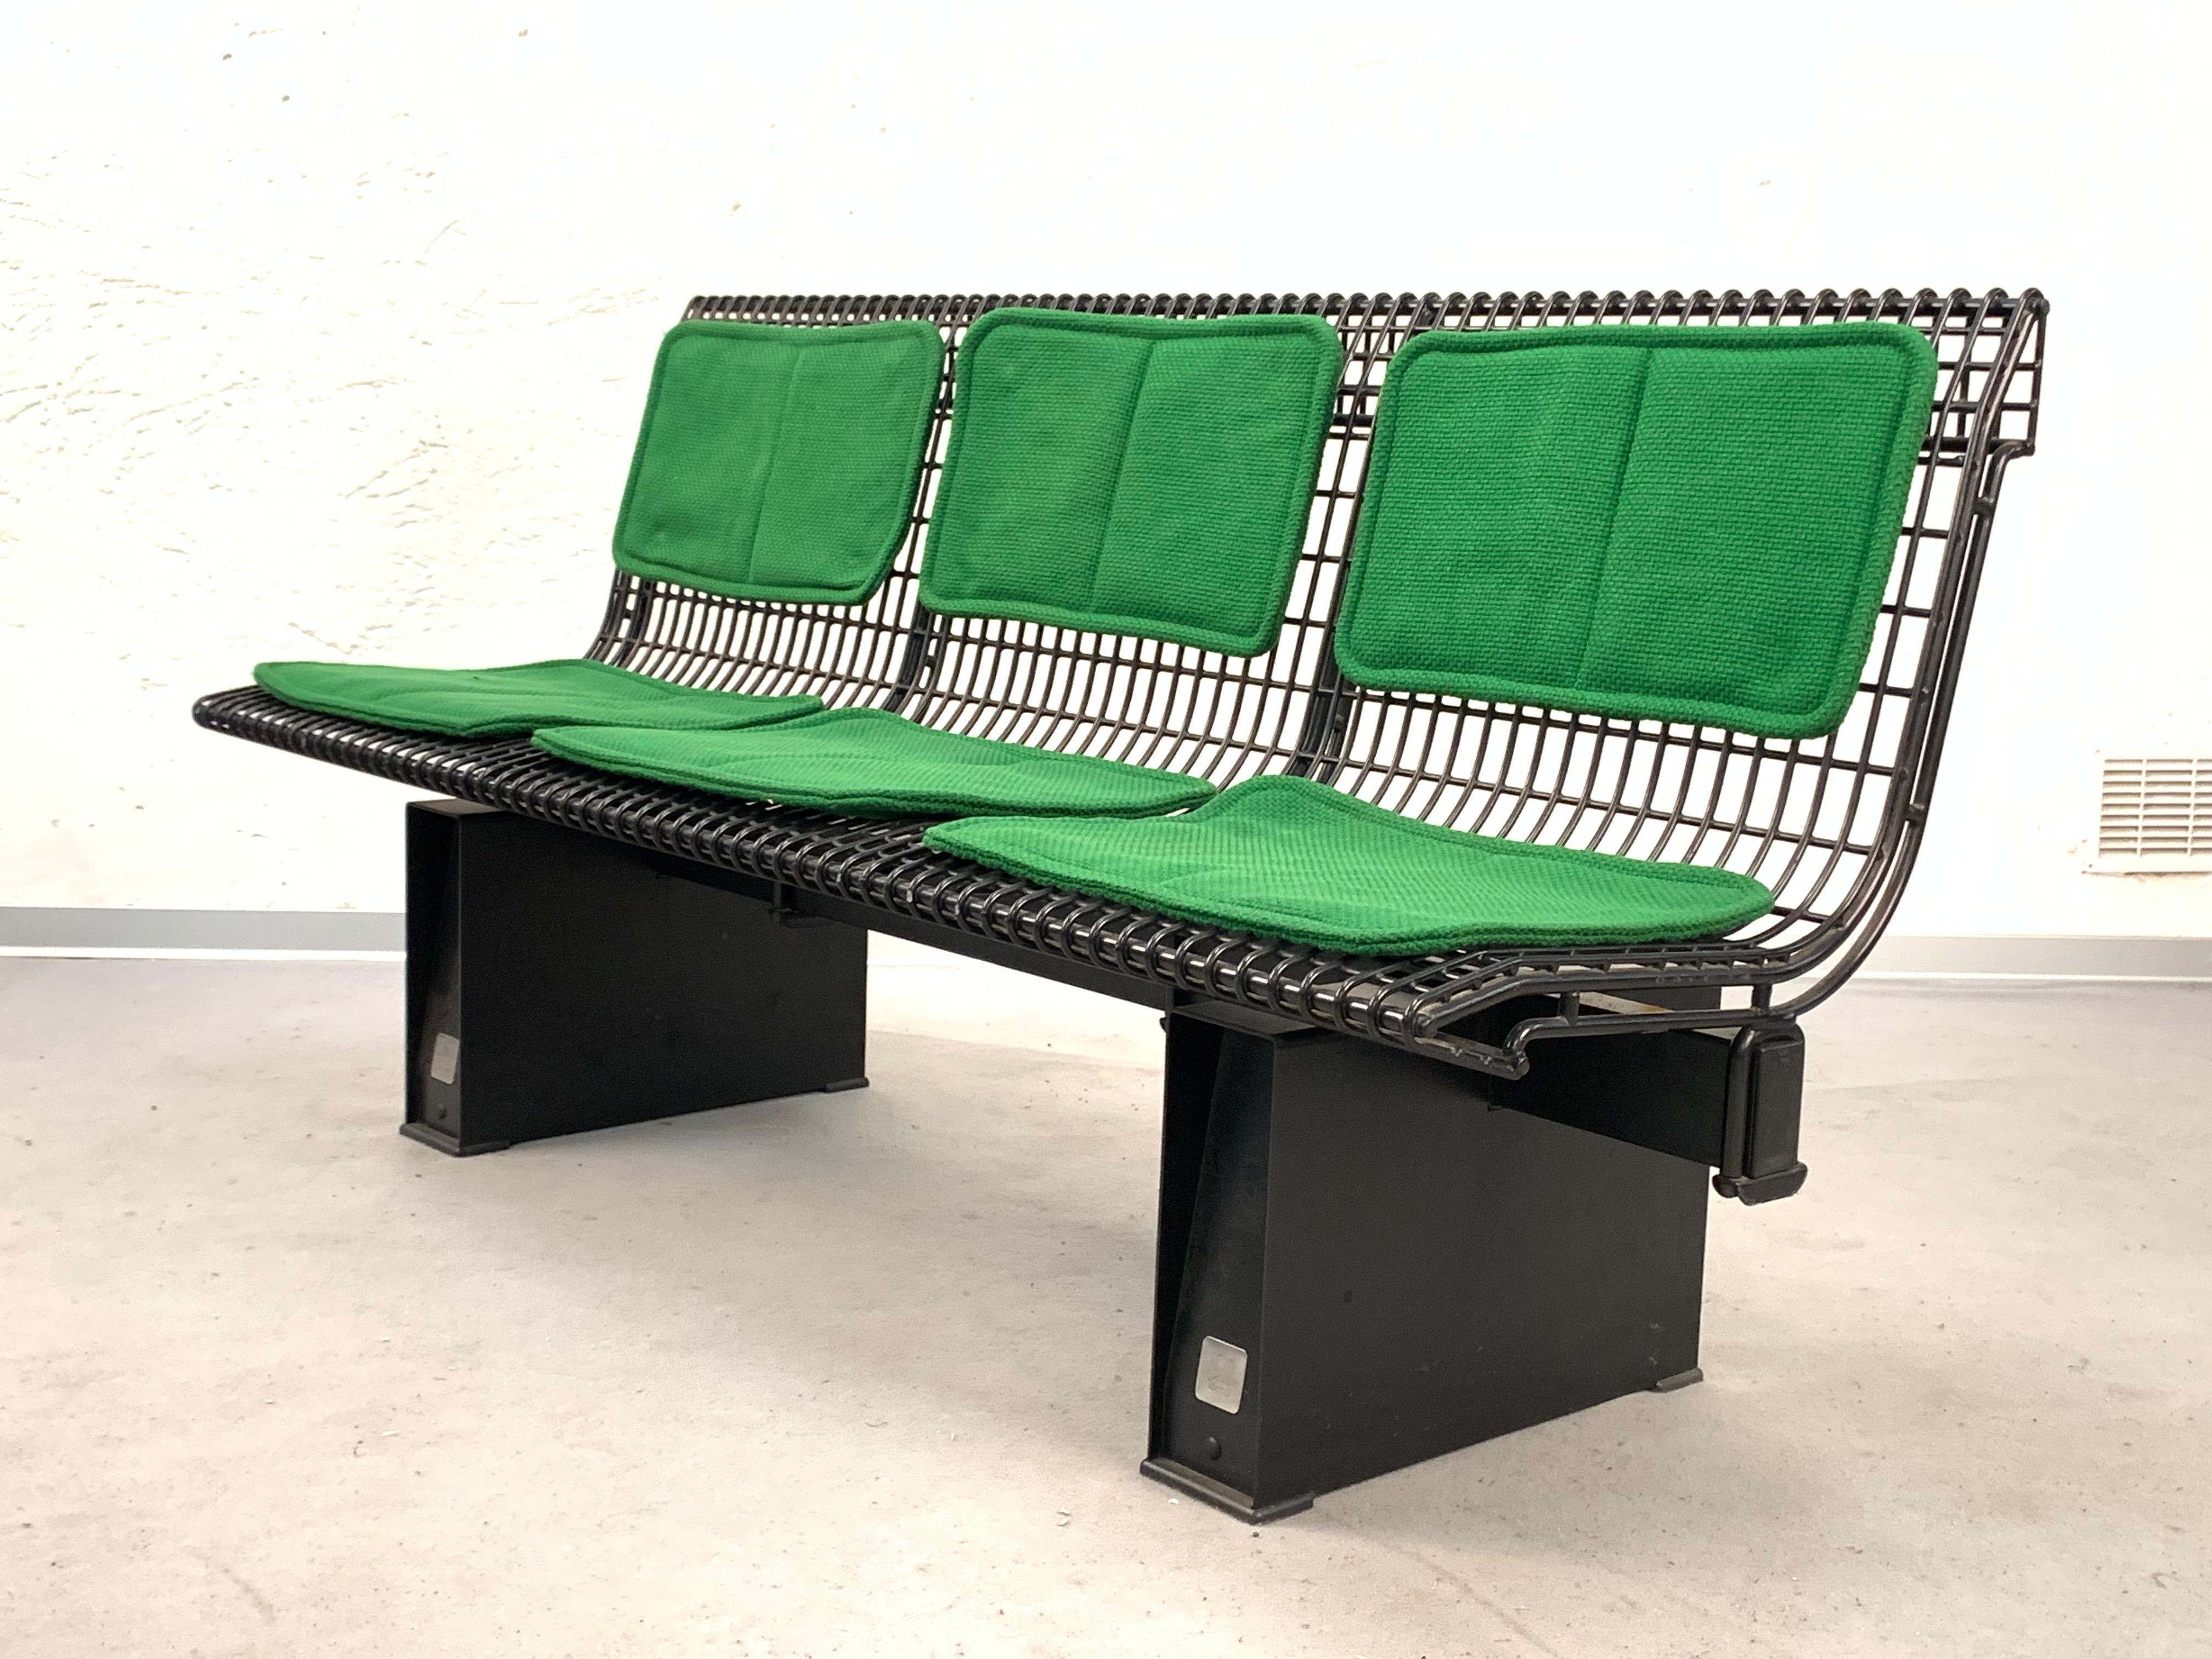 Marco Fantoni Green Fabric and Enameled Steel Italian Bench for Tecno, 1982 For Sale 4